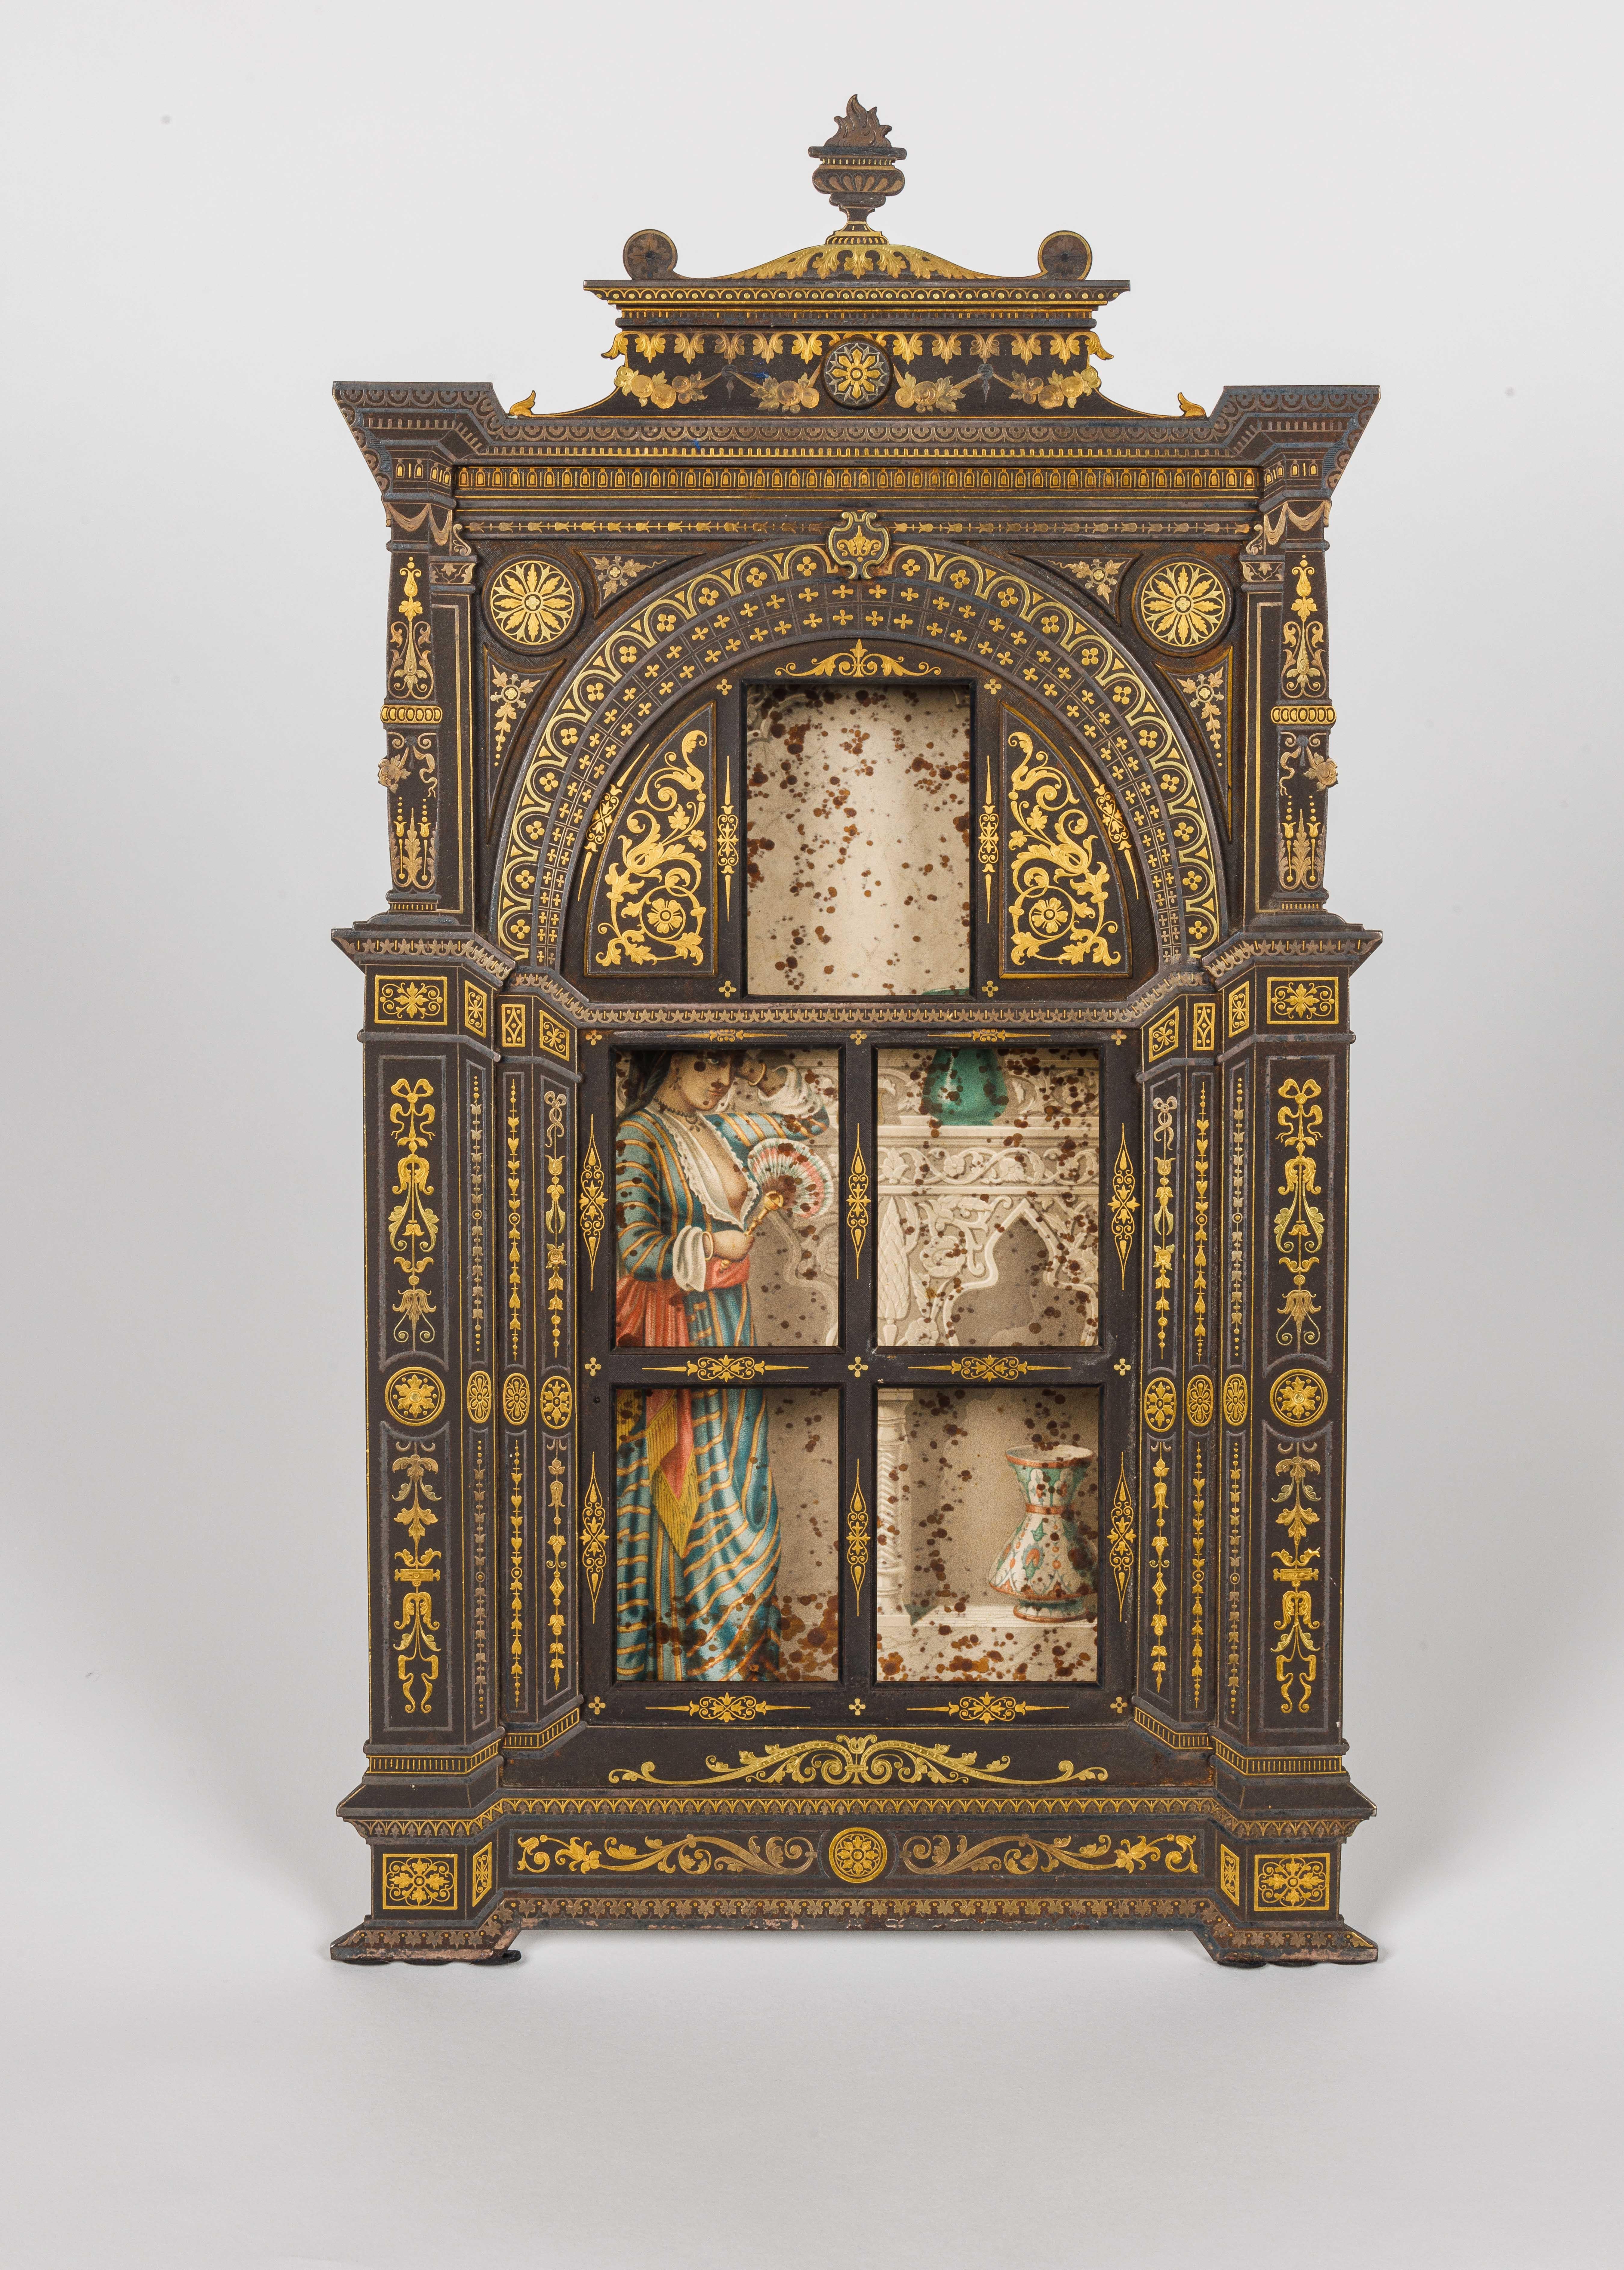 Placido Zuloaga, an extremely rare Spanish gold and silver damascened window frame, circa 1880.

The interior is lined and fitted with an orientalist artwork throughout. 

Signed PZ on the reverse.

Placido Zuloaga was a renowned Spanish